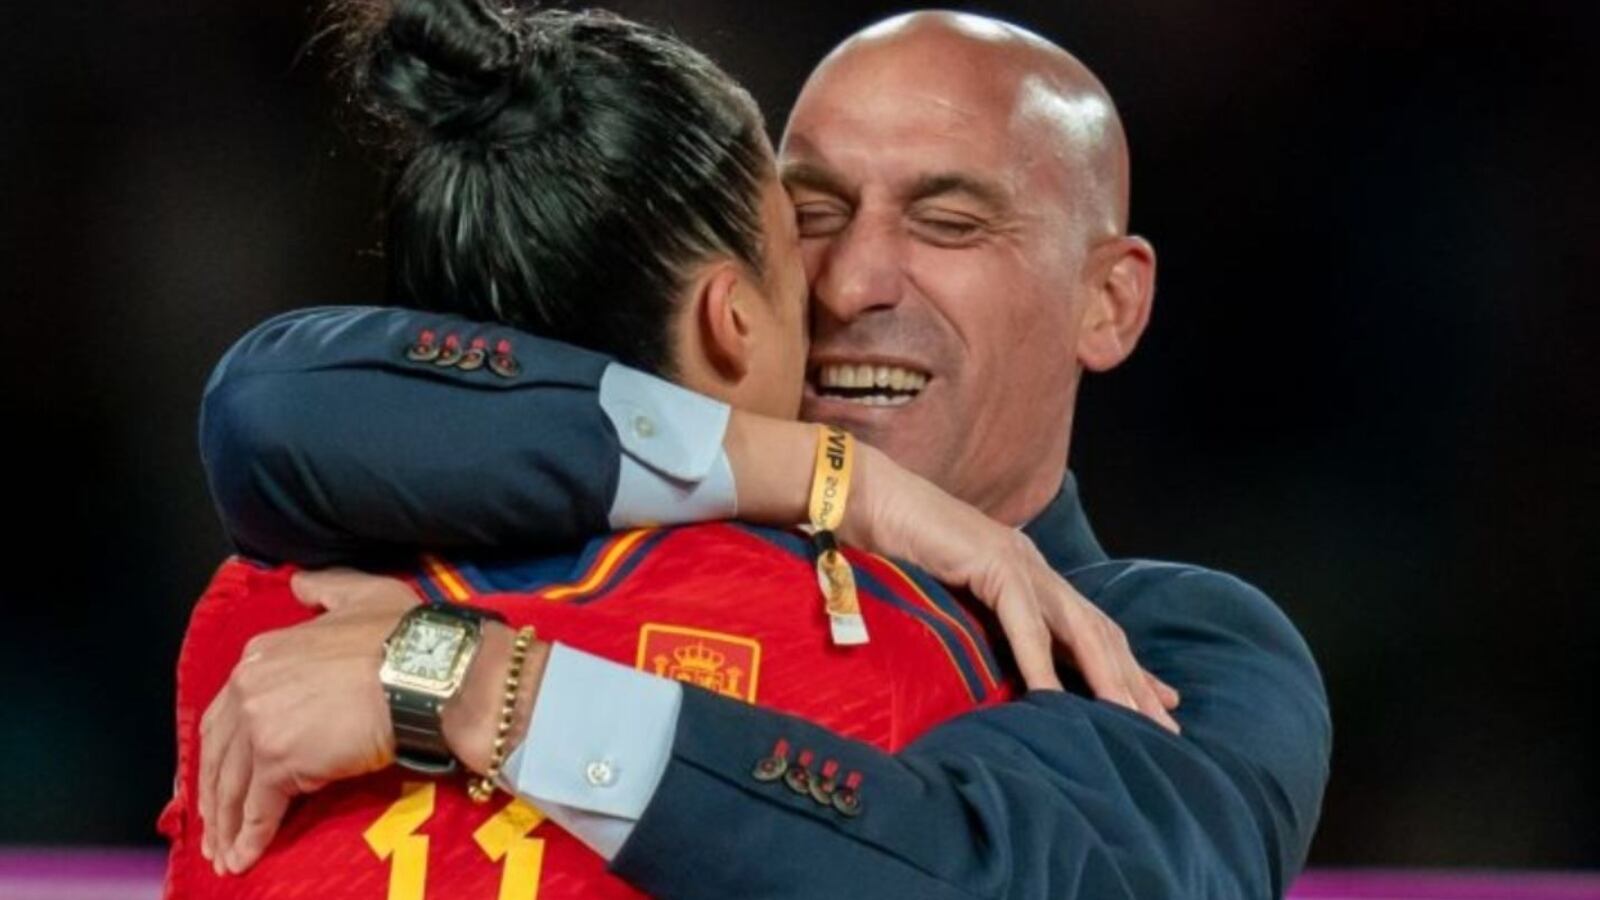 He won the World Cup with Spain and calls for the dismissal of Rubiales after kissing a player